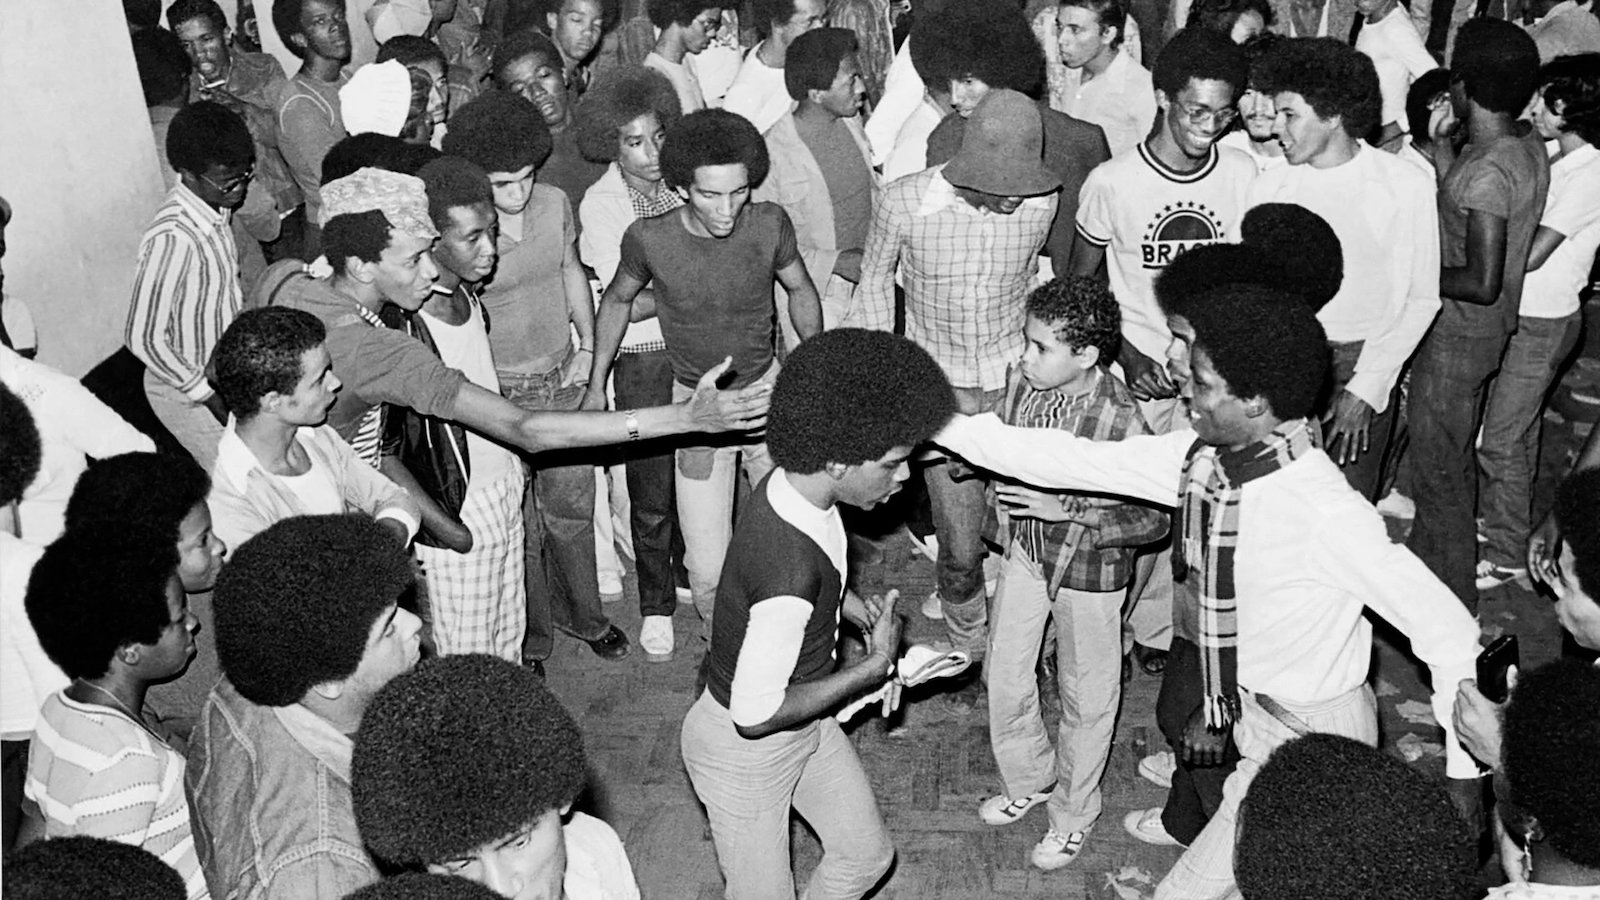 A black and white image of a group of people wearing afros dancing together joyously in a circle.